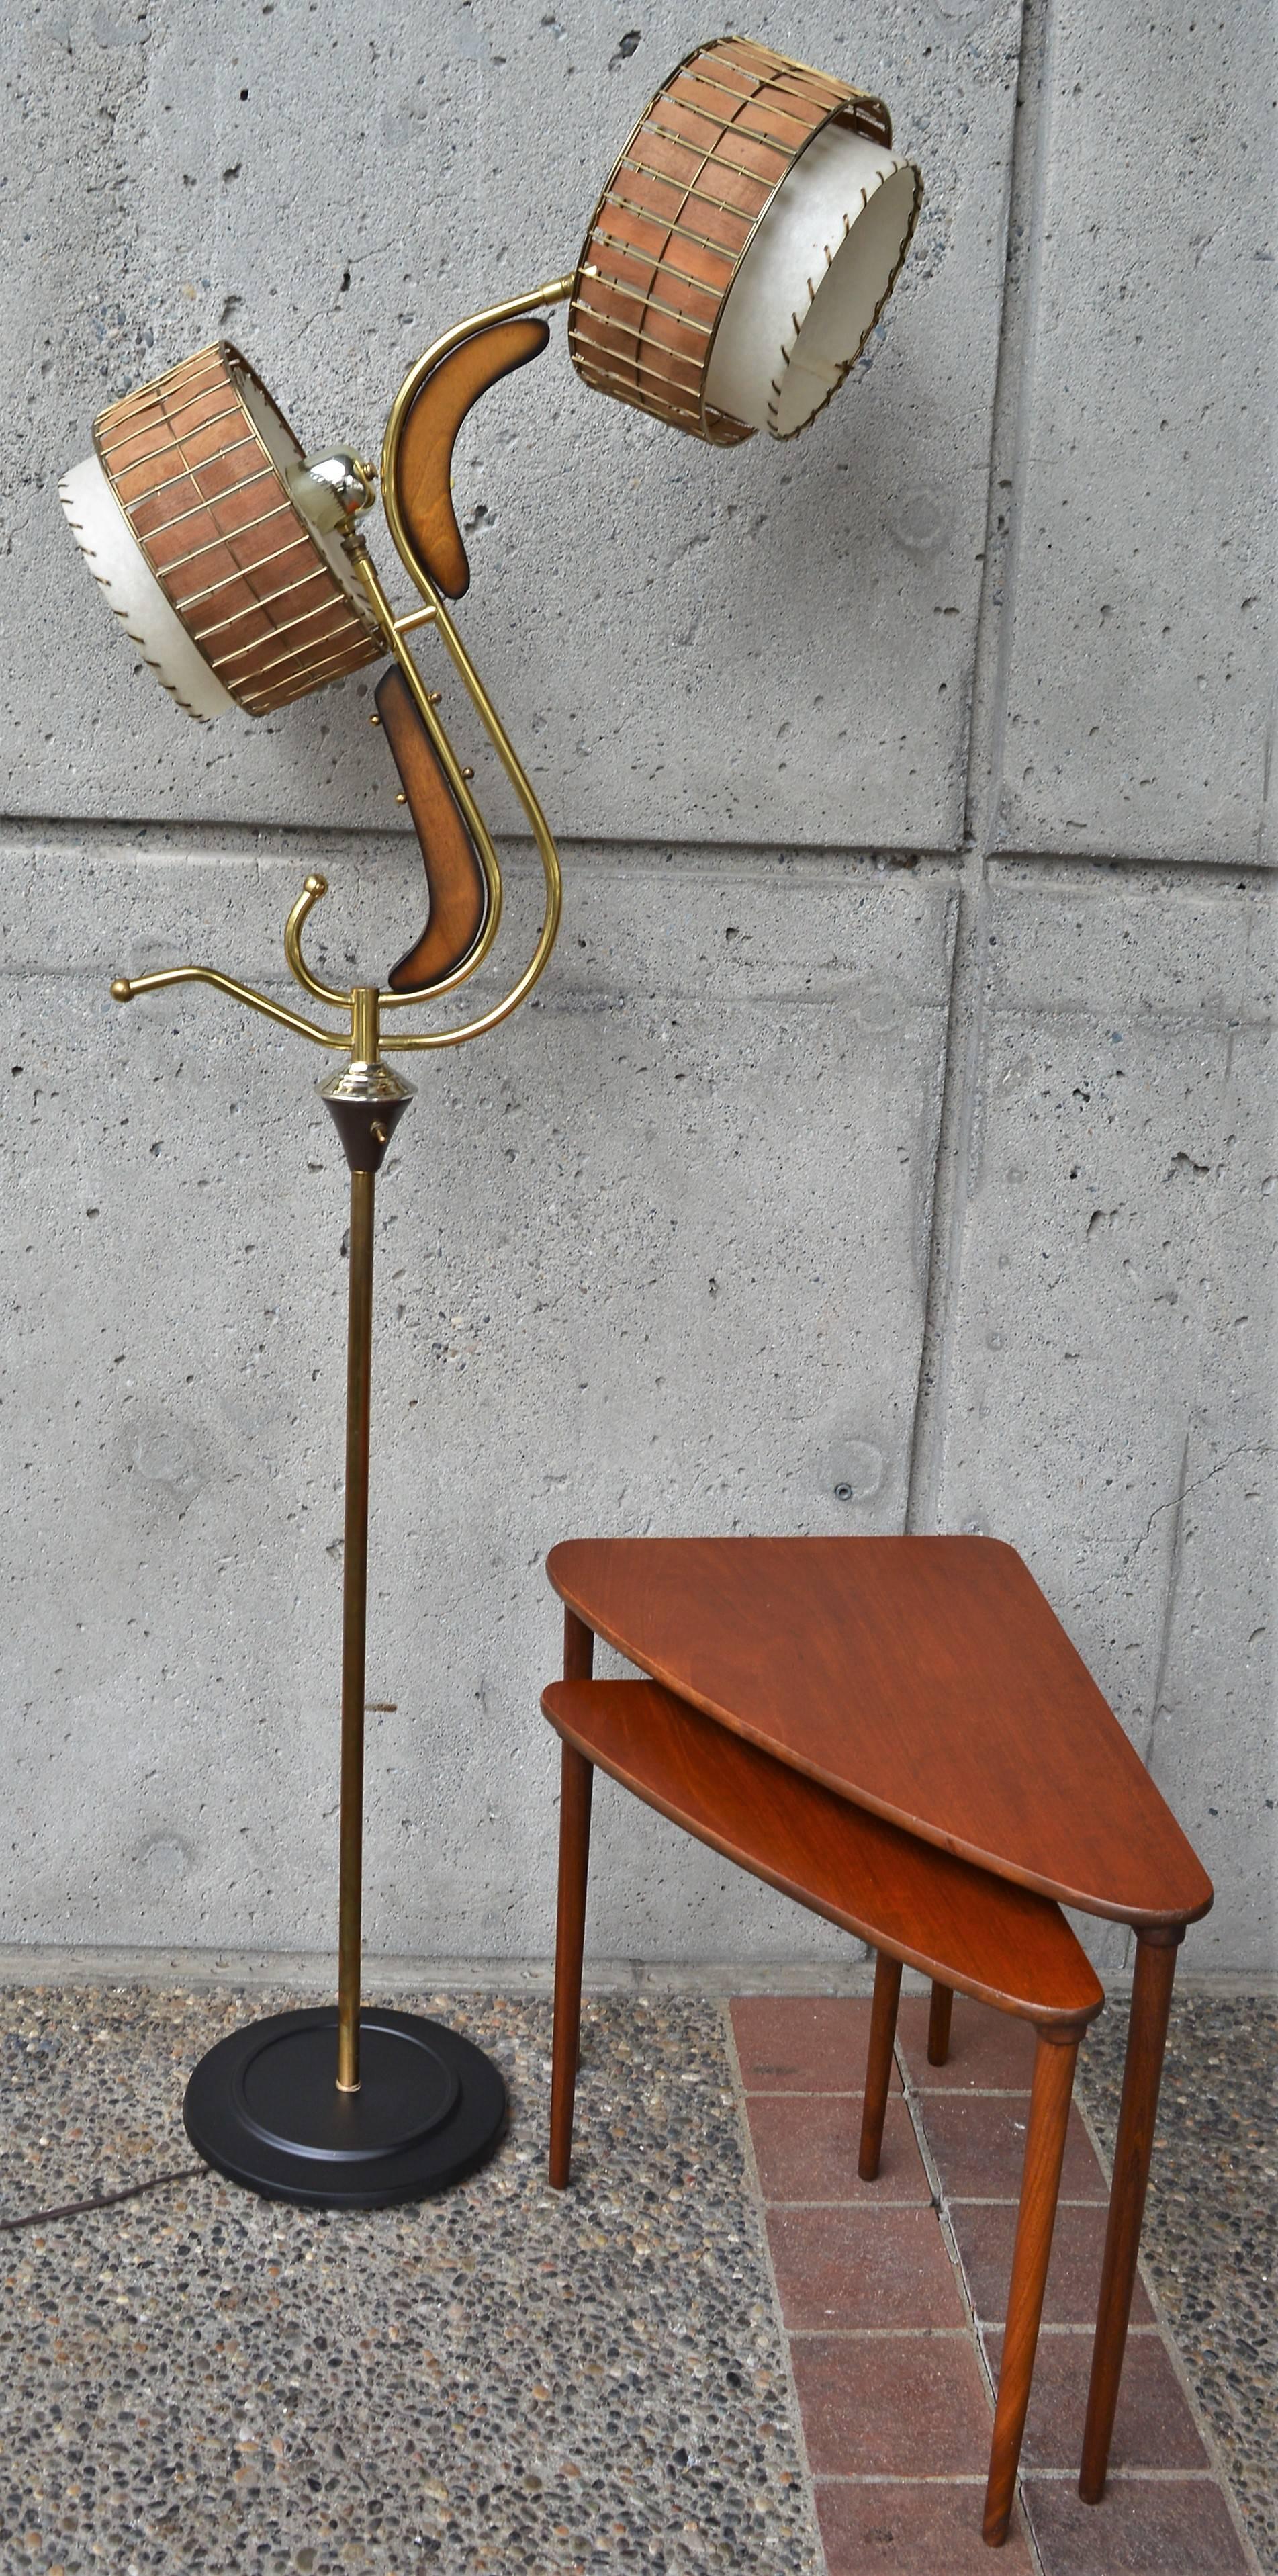 American Atomic Style Majestic Floor Lamp with Original Fibreglass and Wood Slat Shades For Sale